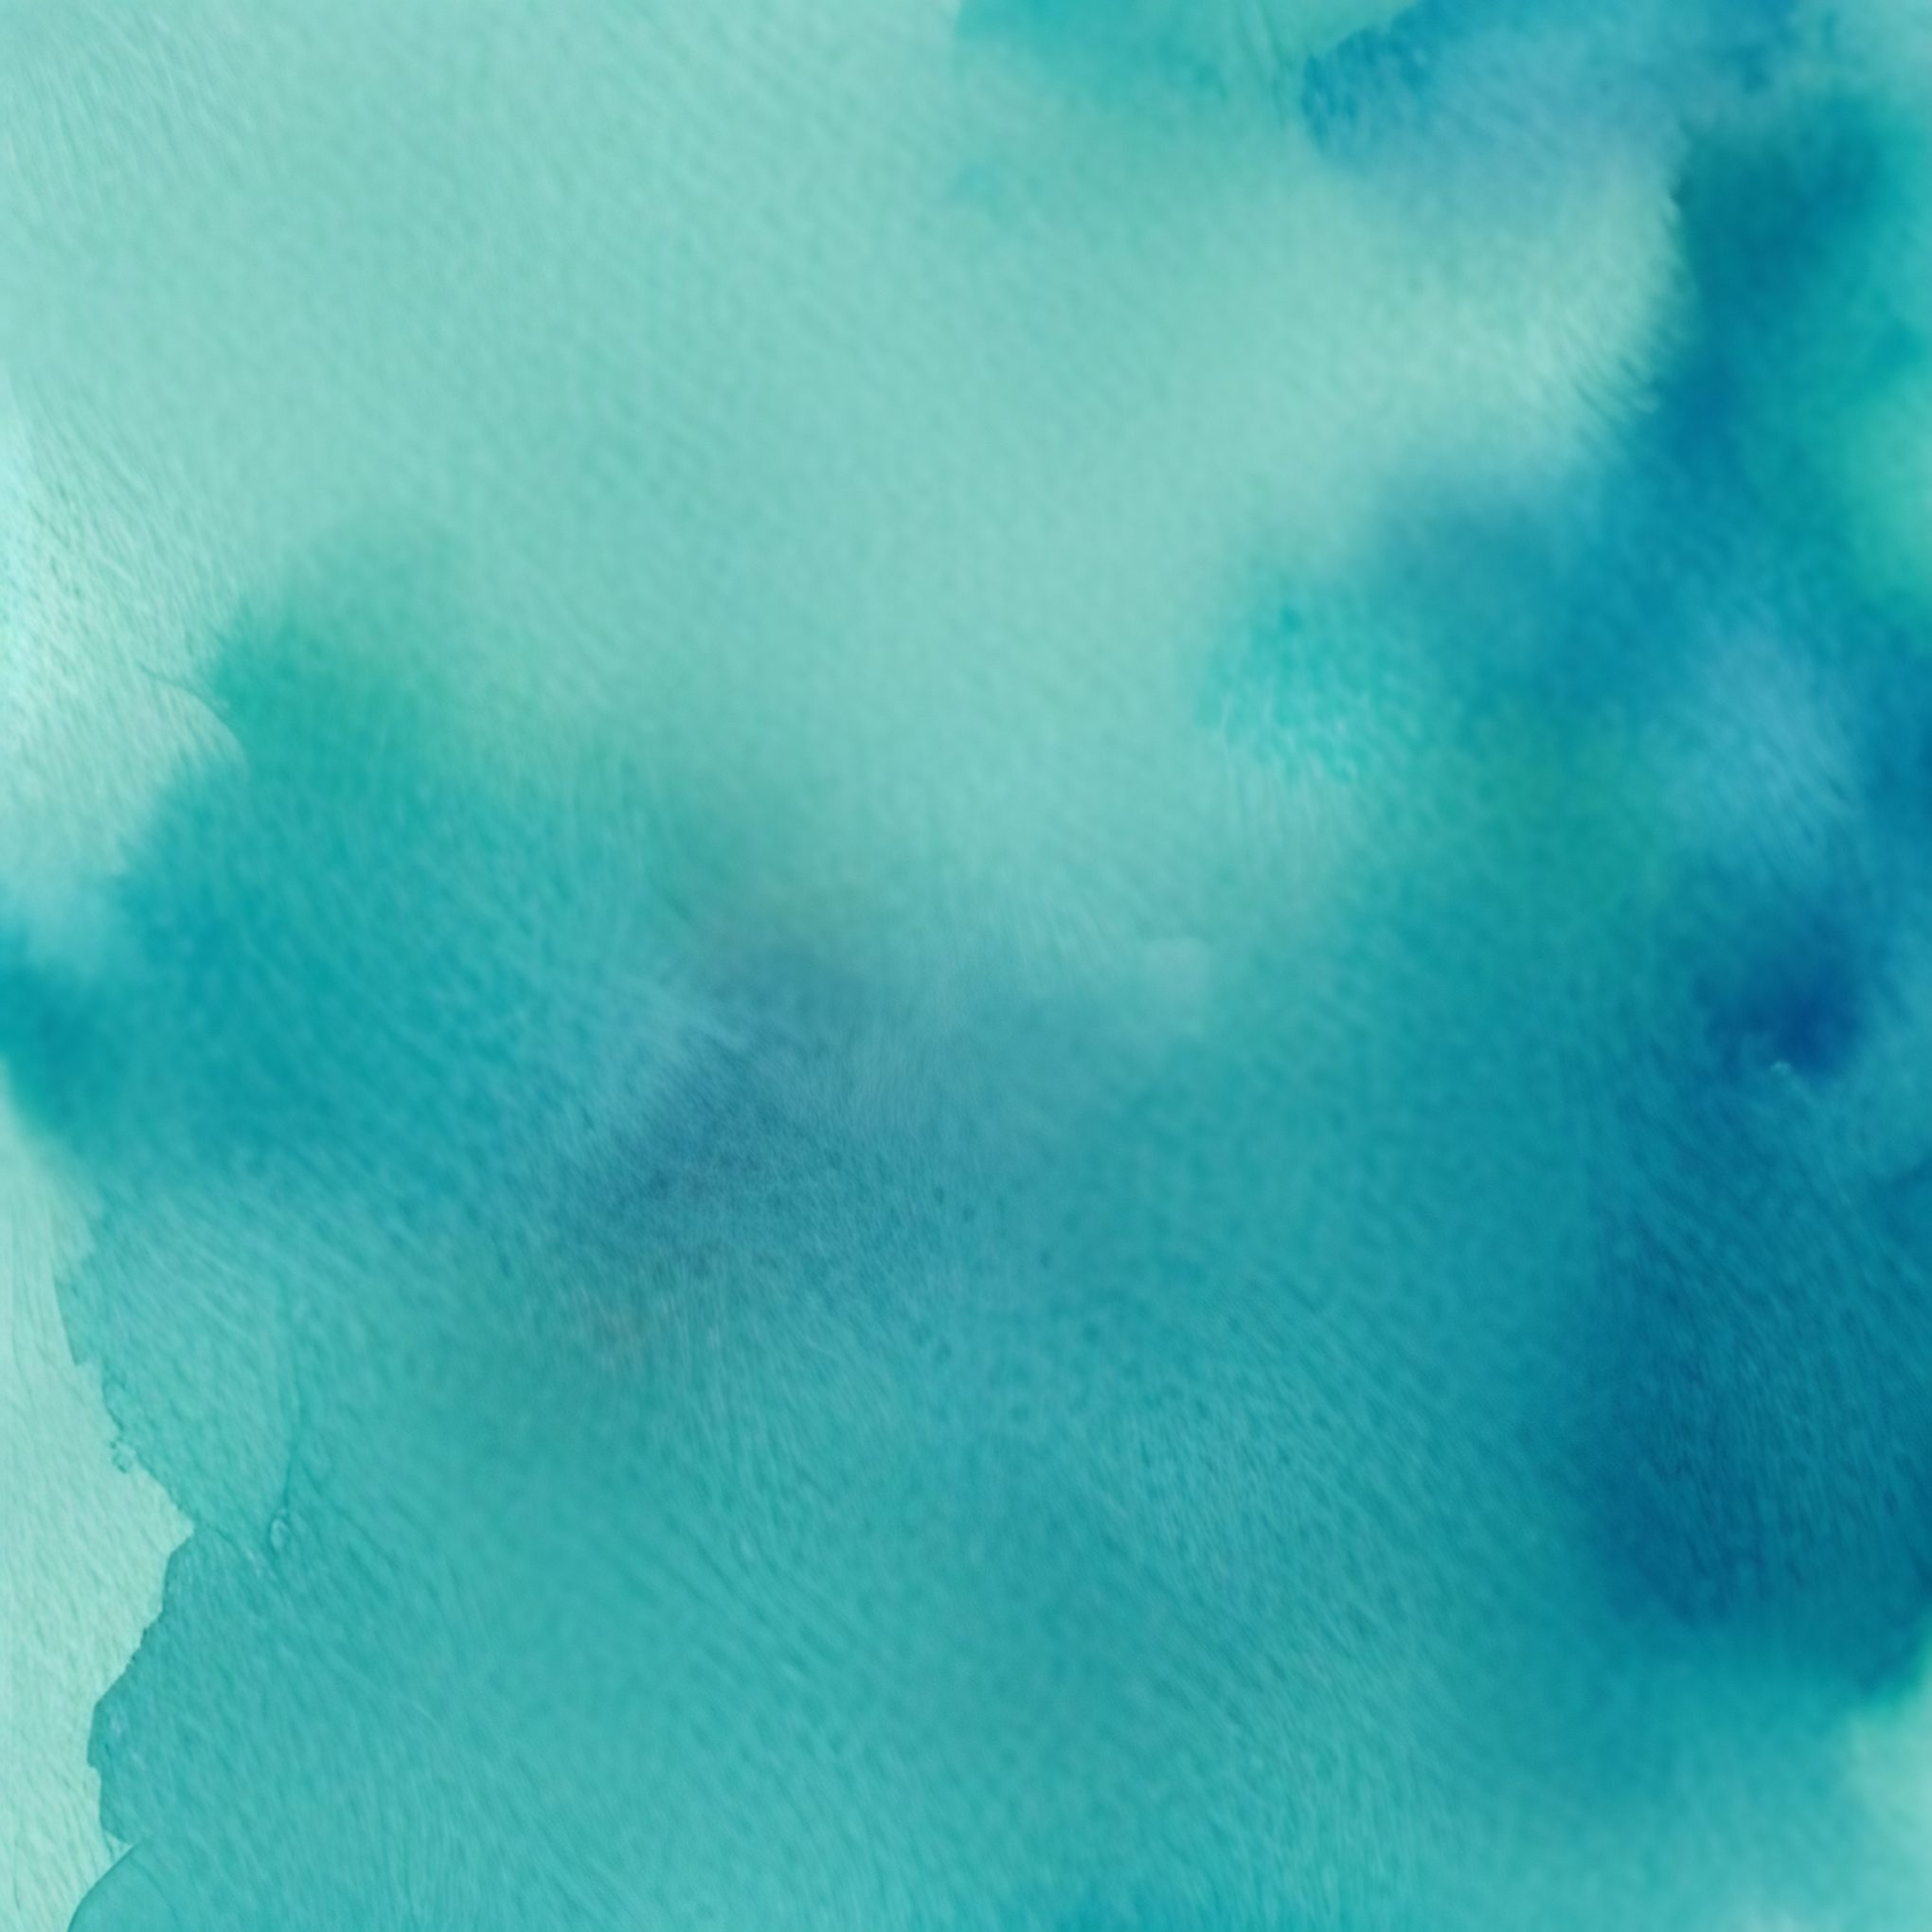 Turquoise Watercolor Background Image